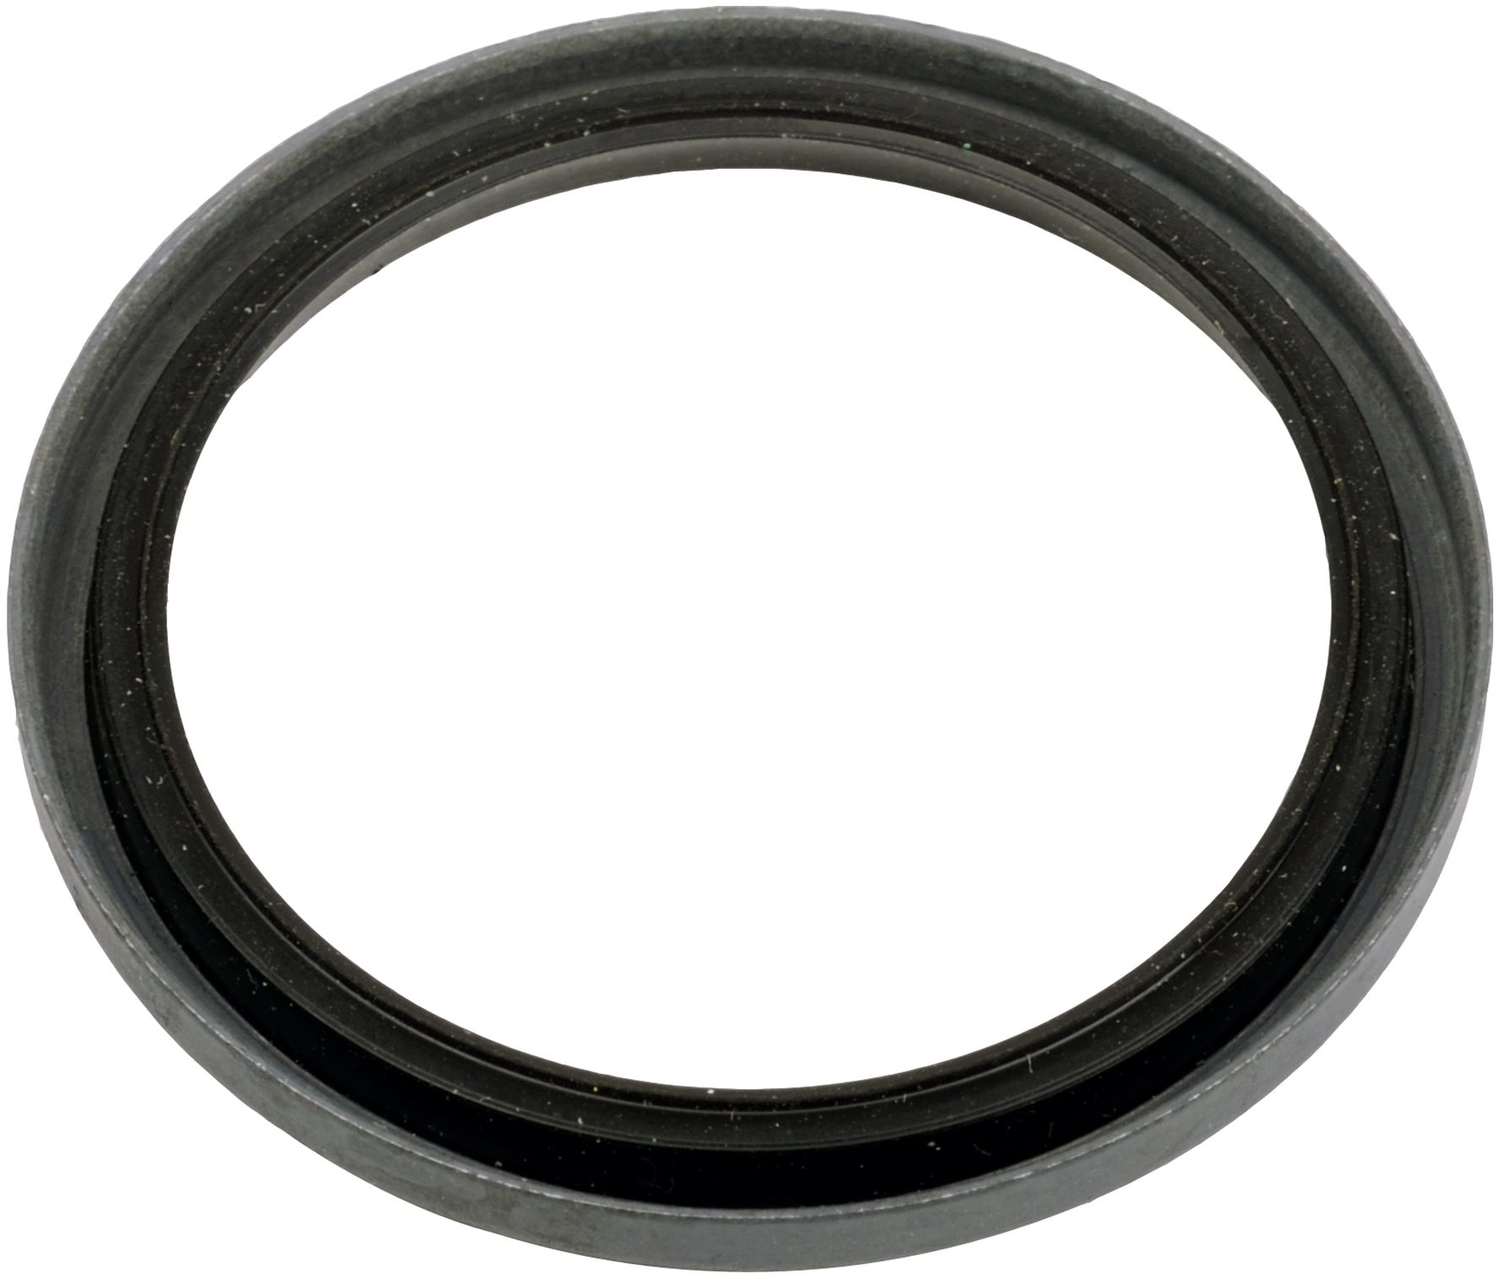 SKF (CHICAGO RAWHIDE) - Axle Spindle Seal - SKF 11050